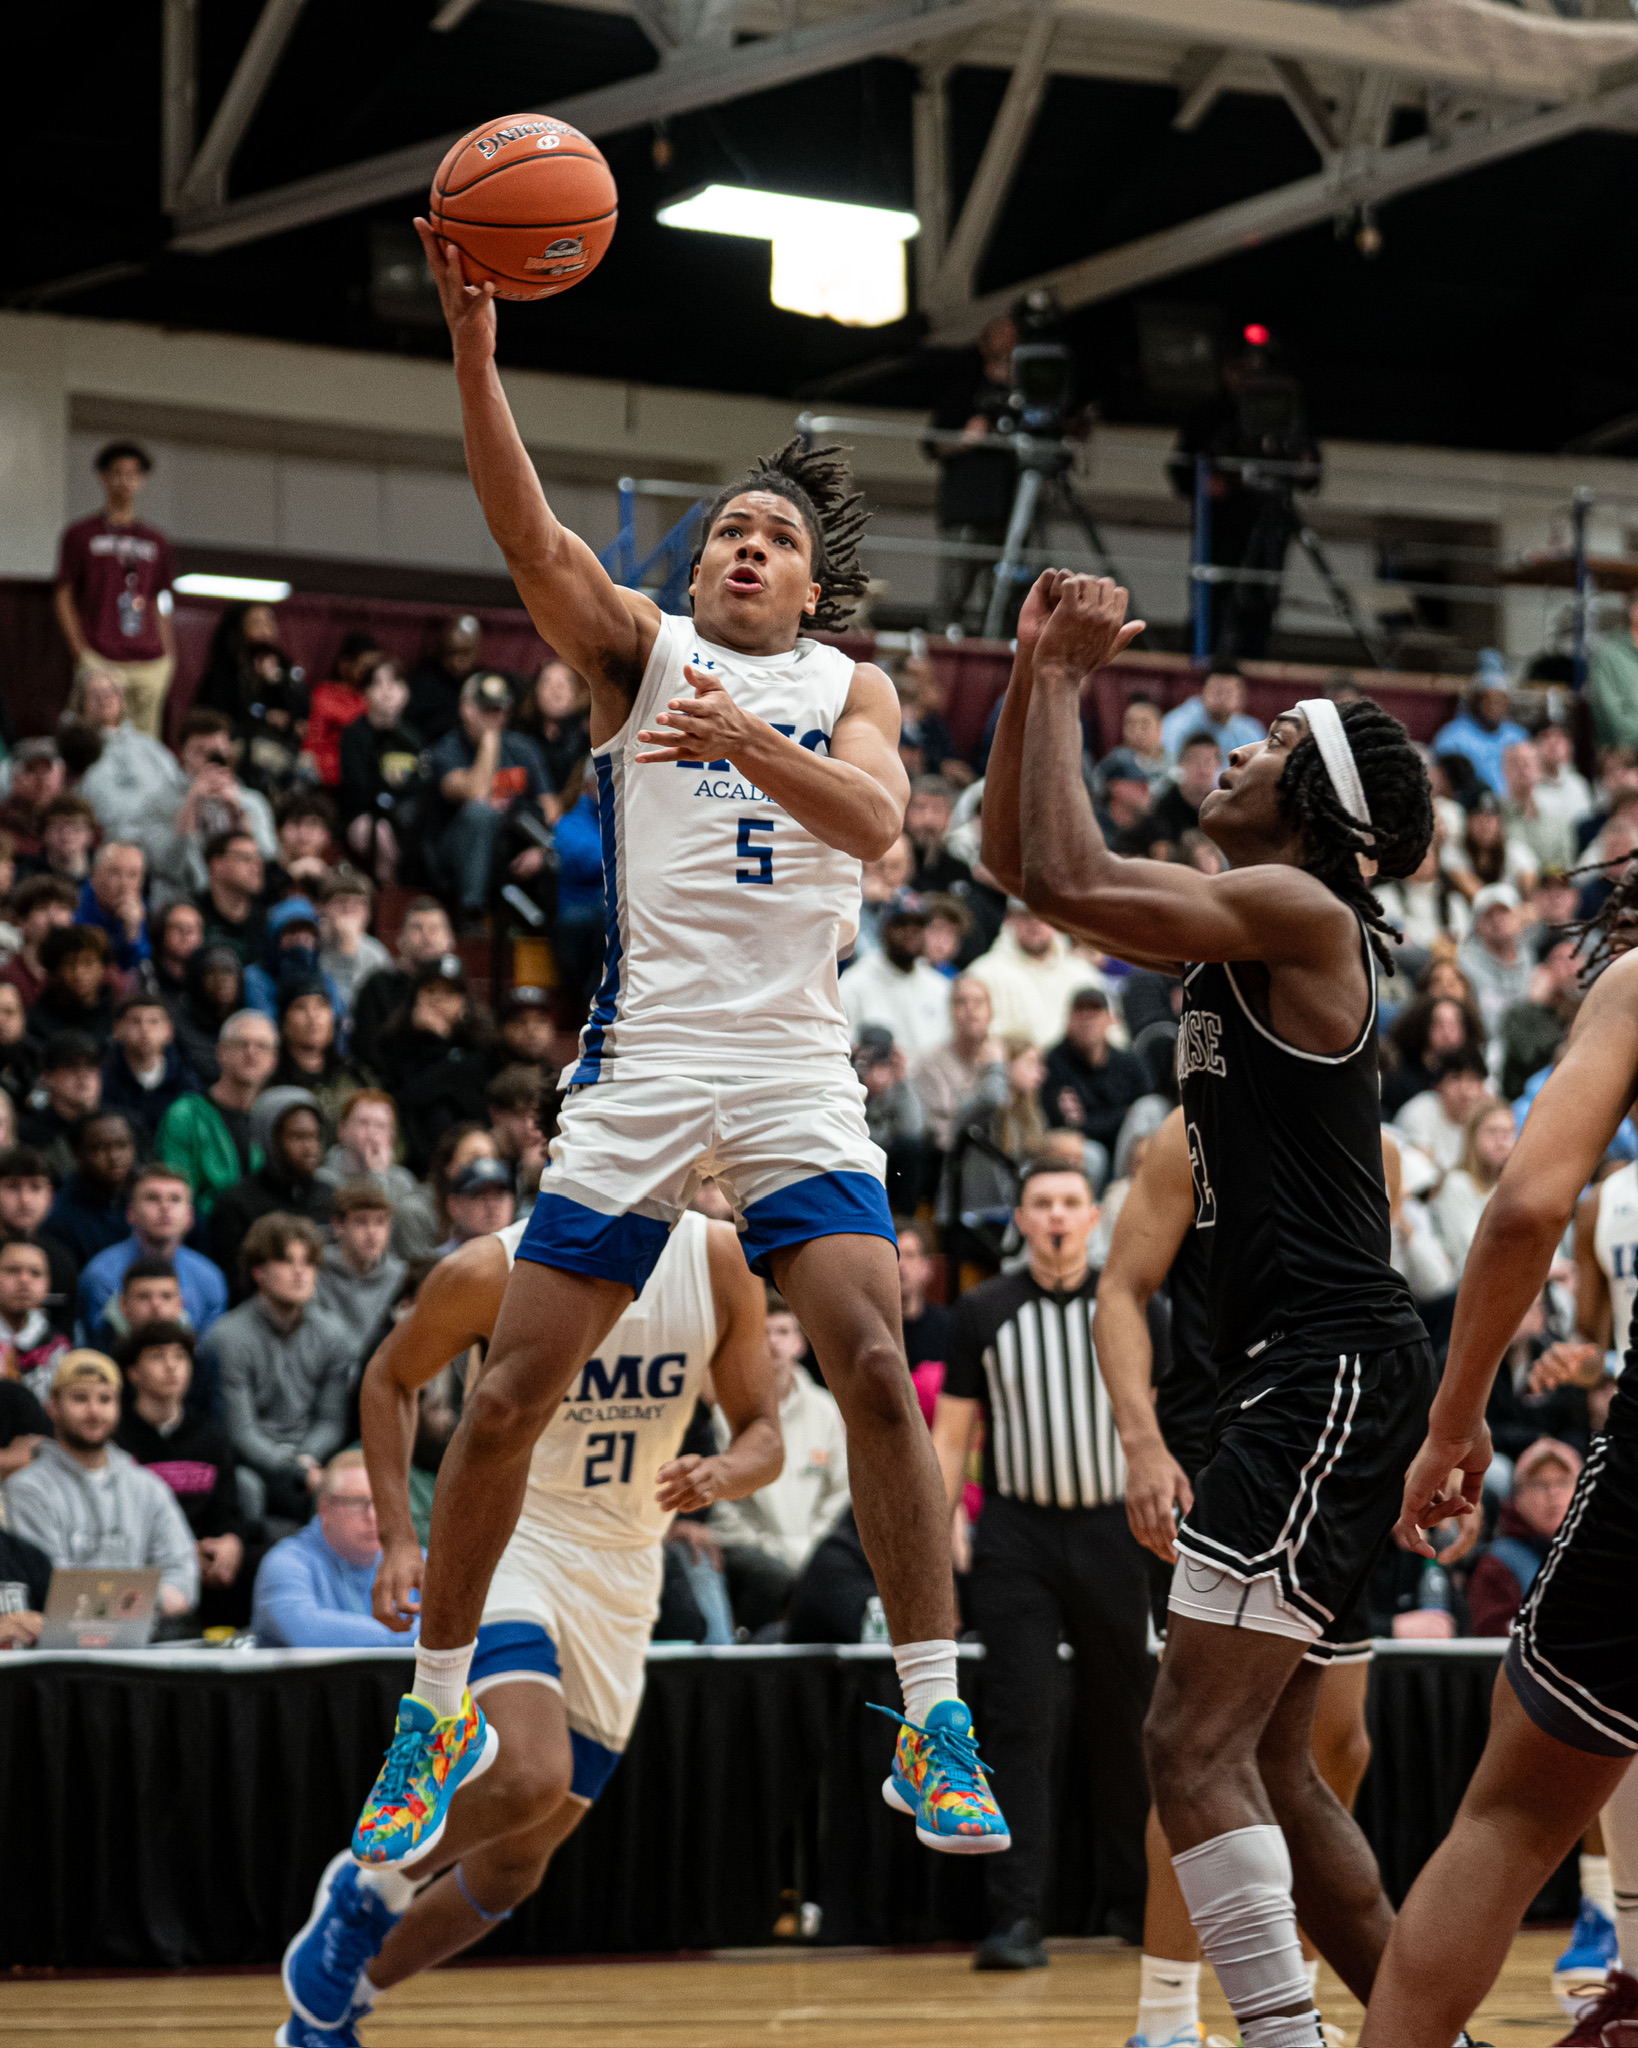 Ten names to remember from Hoophall Classic in Springfield